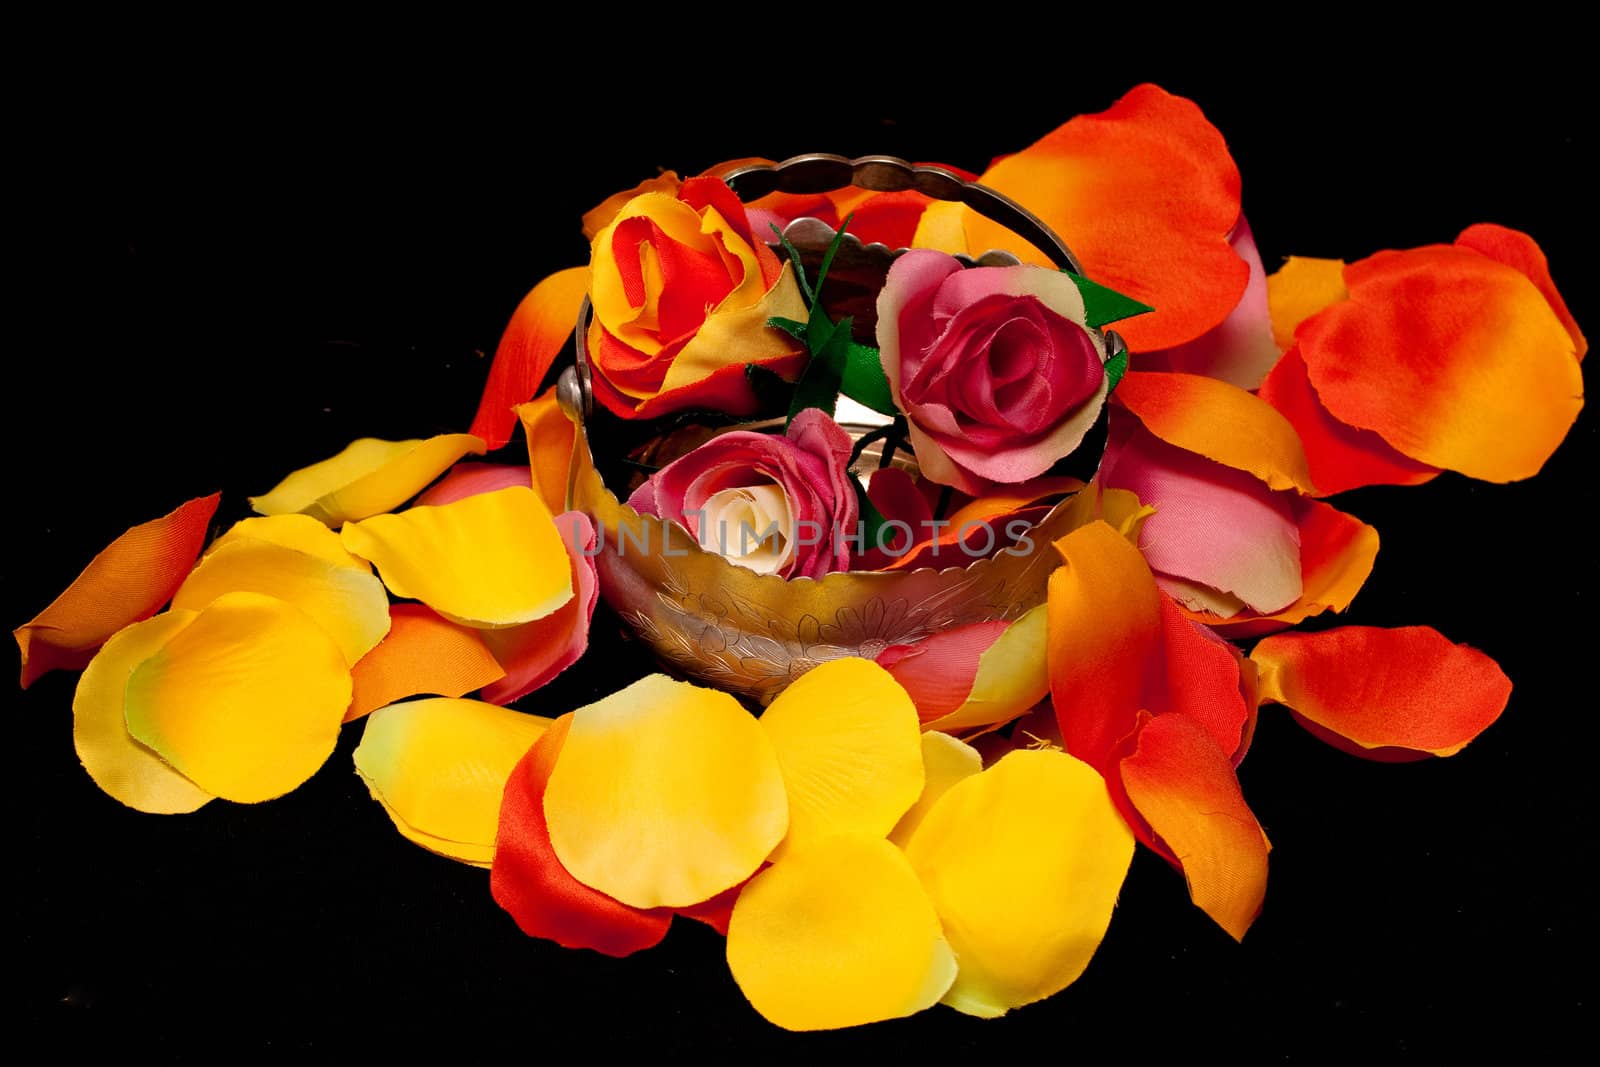 A silver basket with three artificial roses on orange, yellow and pink rose textile petals on black
